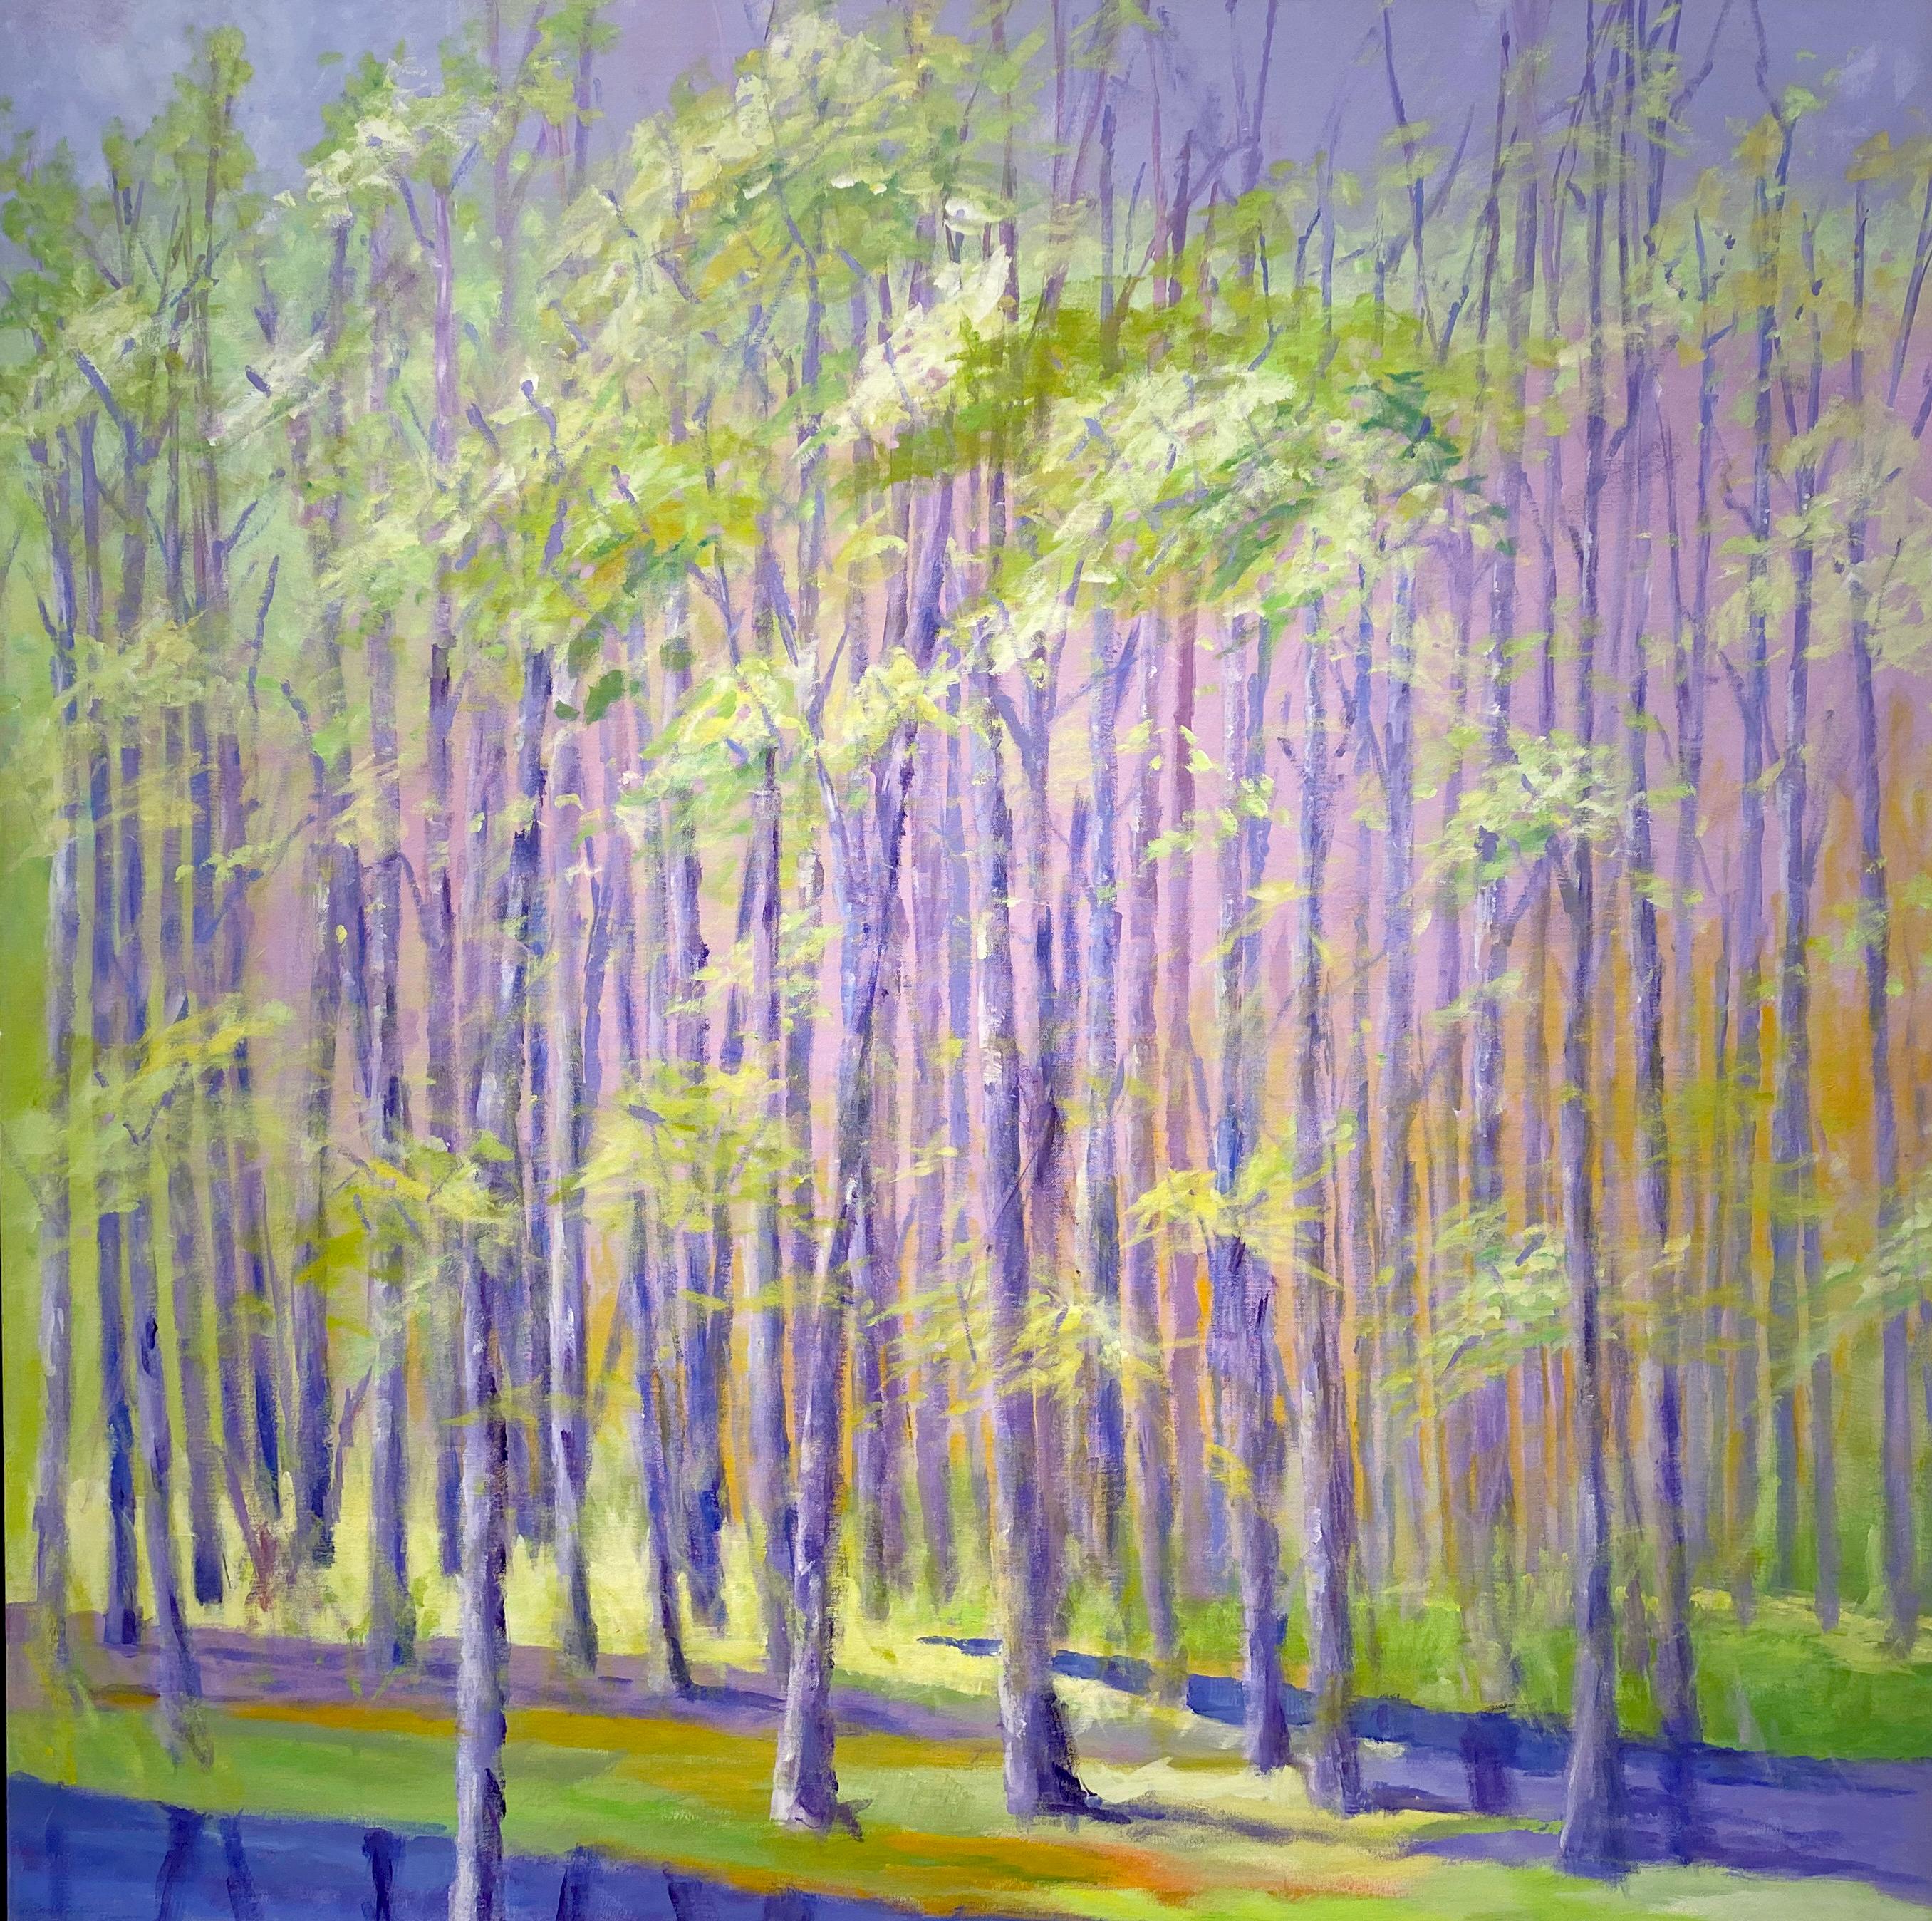 Charles Emery Ross Landscape Painting - C.E. Ross, "Into the Woods", Colorful Green Purple Tree Forest Landscape 